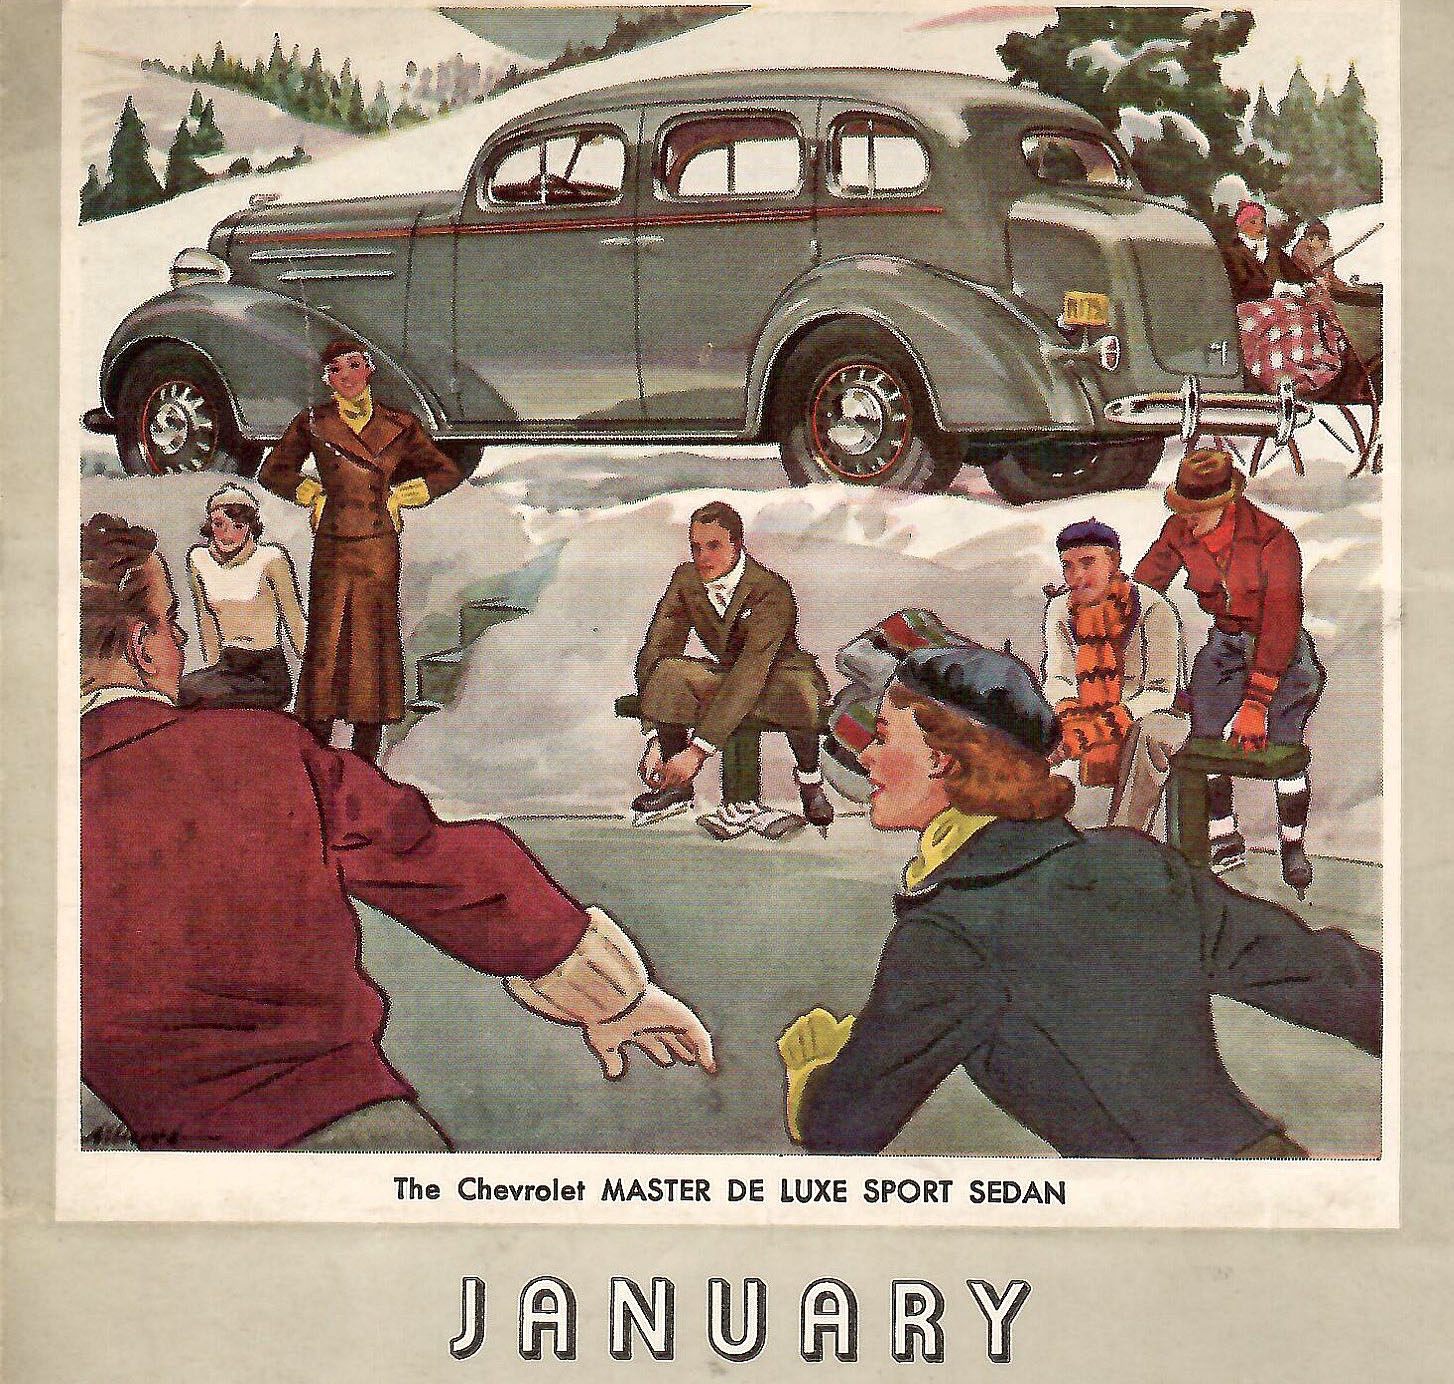 Read more about the article Travel Through the Seasons Via this Vintage Car Calendar!